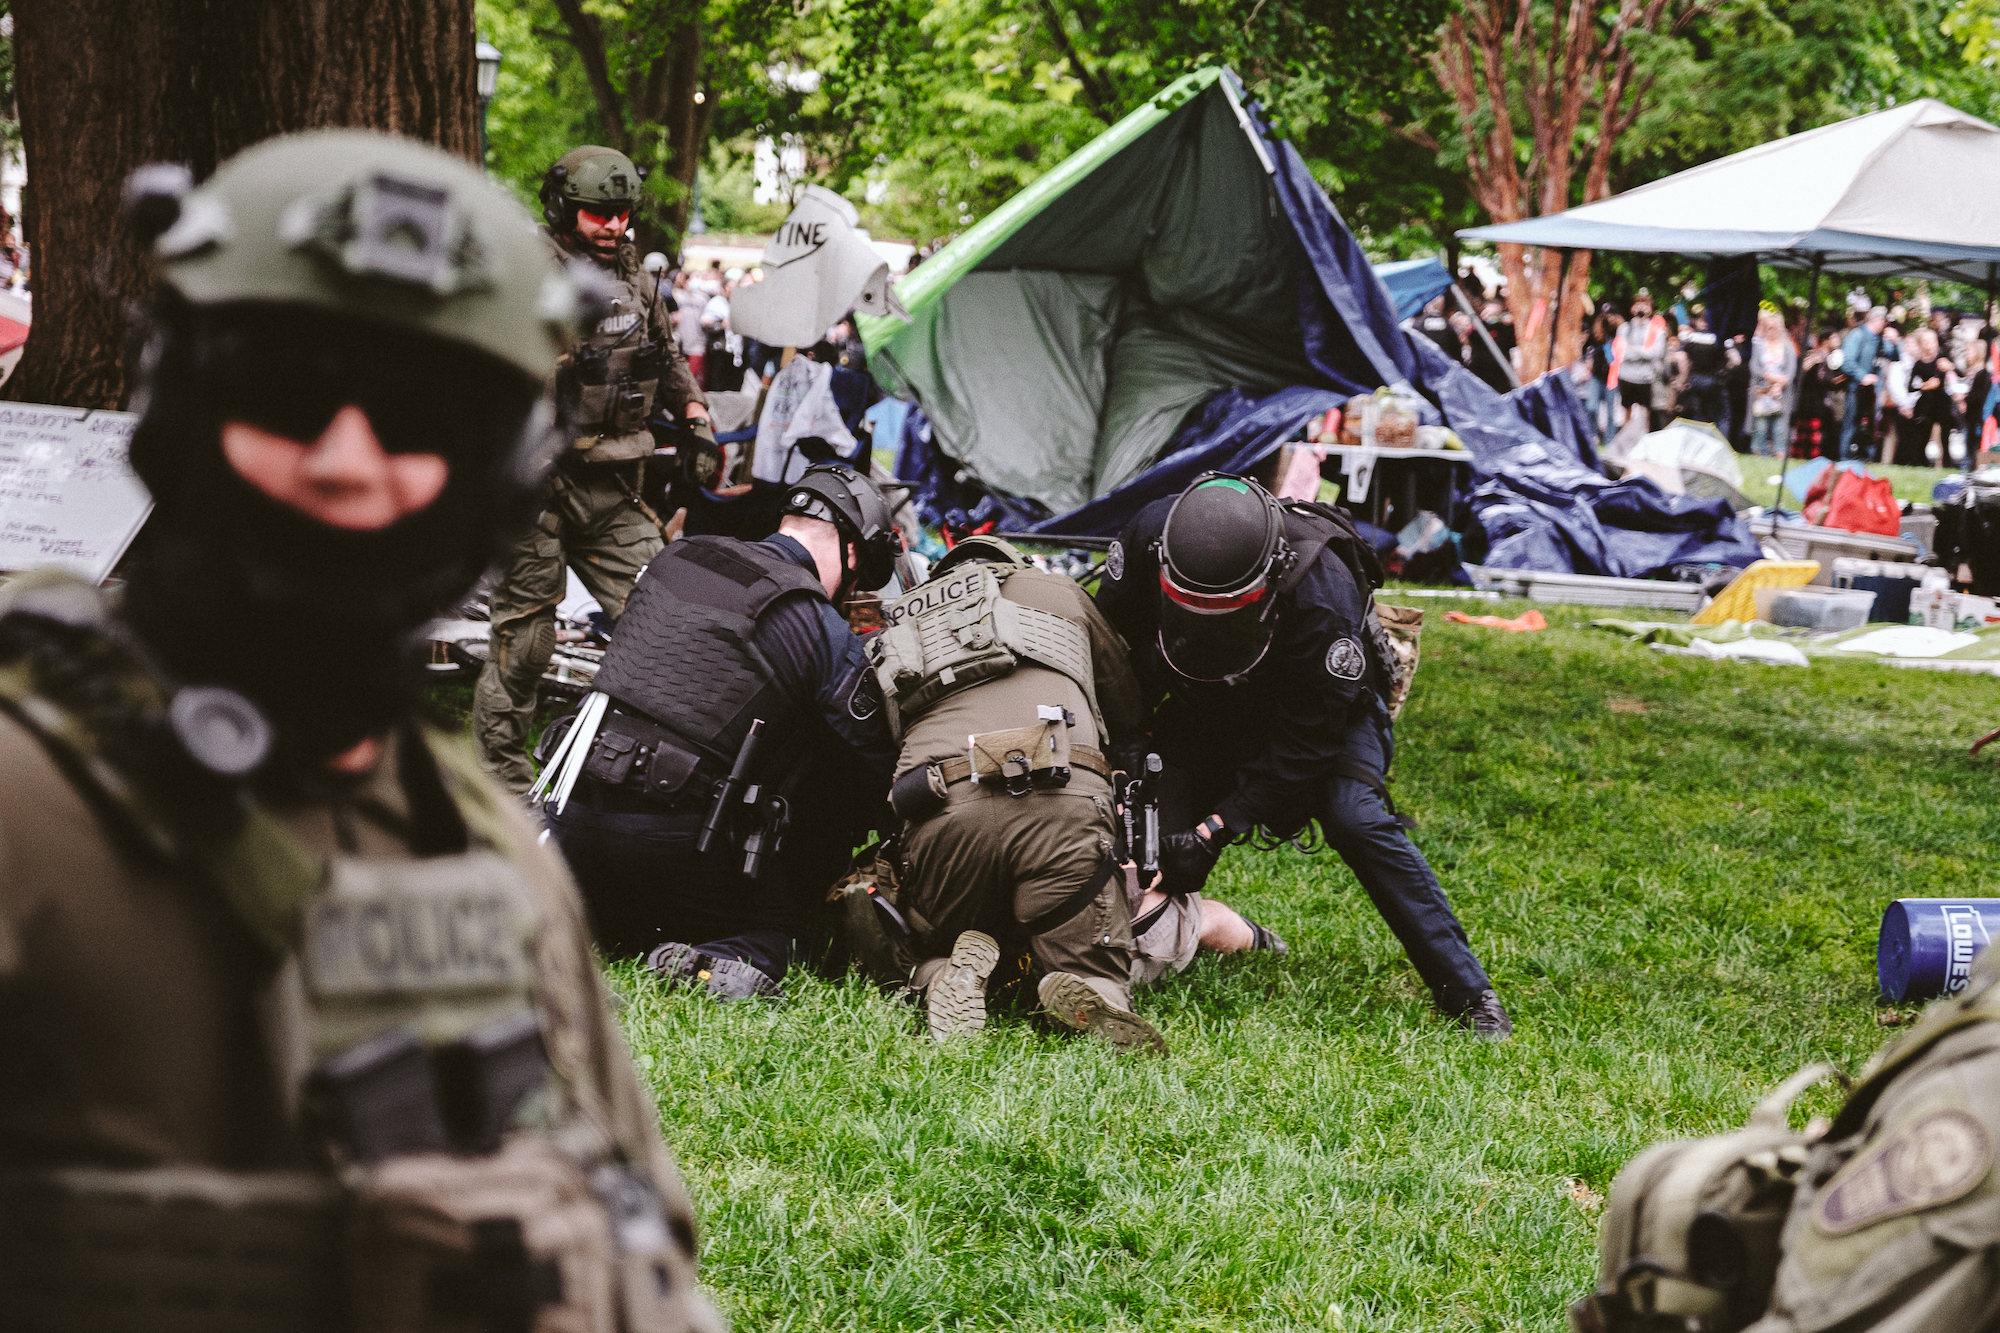 Heavily armed police officers arrest a protester on the grounds of the University of Virginia in Charlottesville, Virginia, on Saturday.